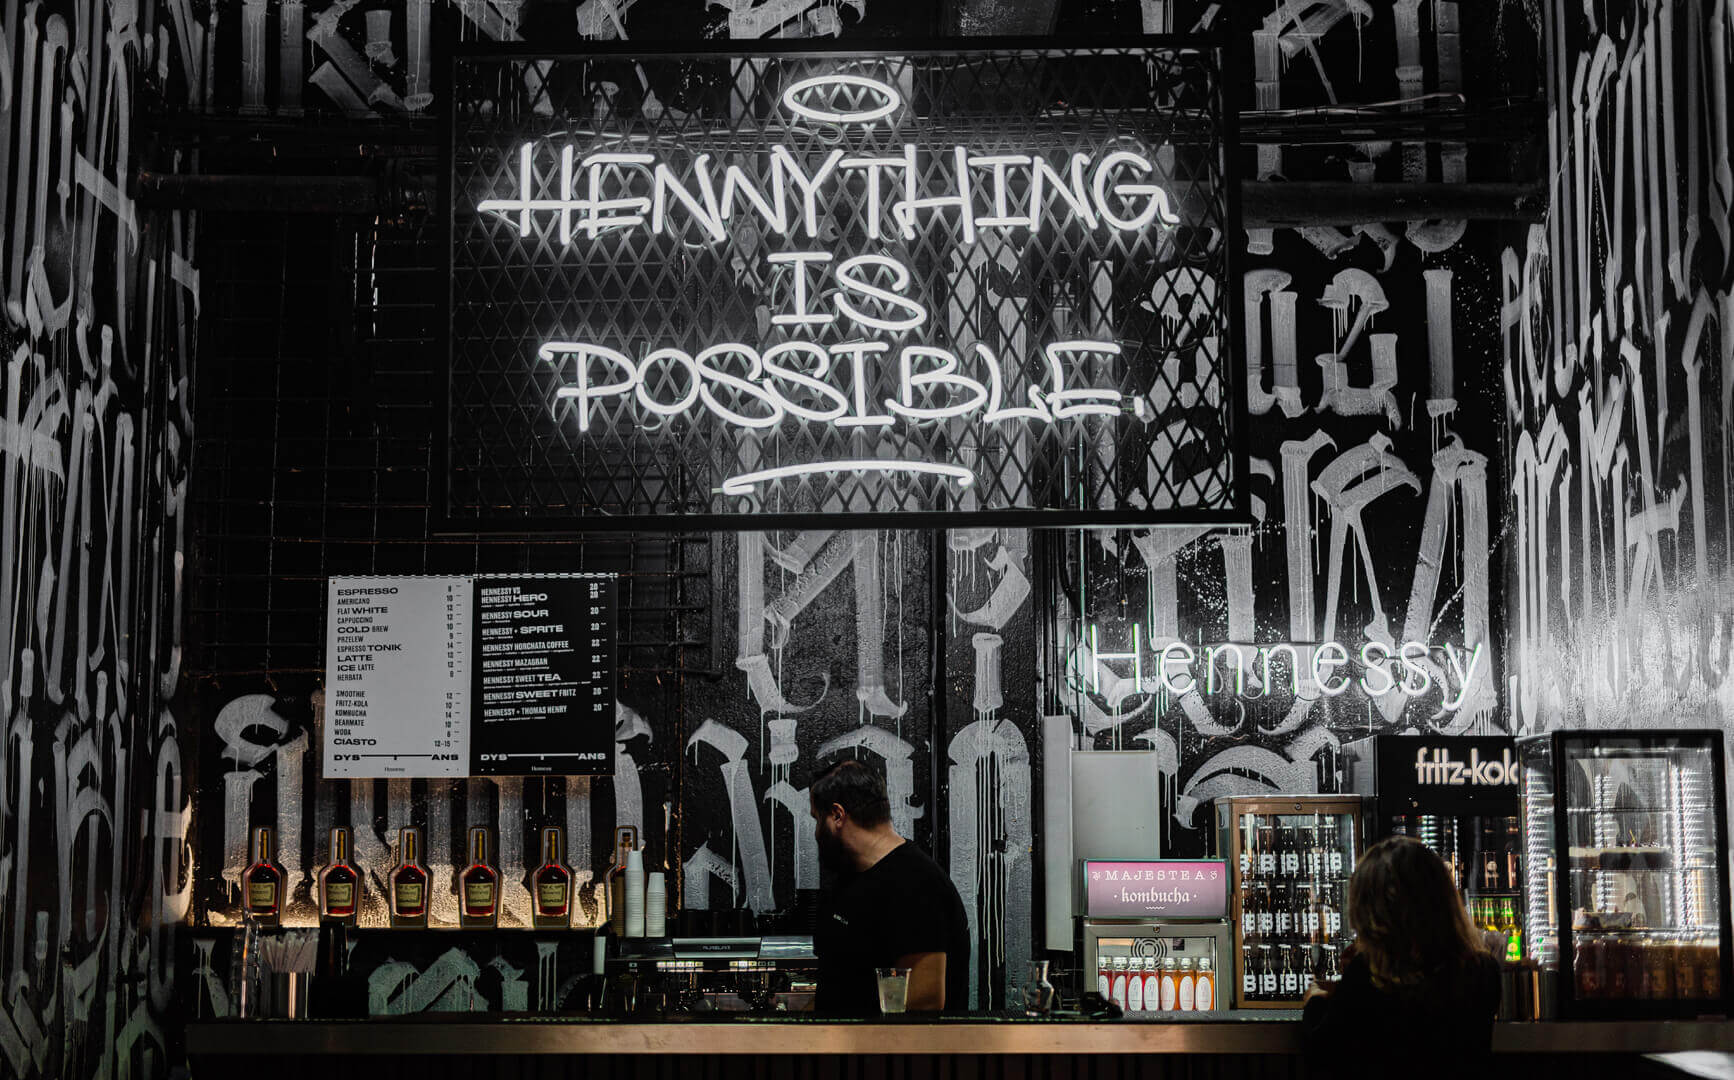 Hennything is possible - Neon sign on a mesh over a bar in Gdańsk.